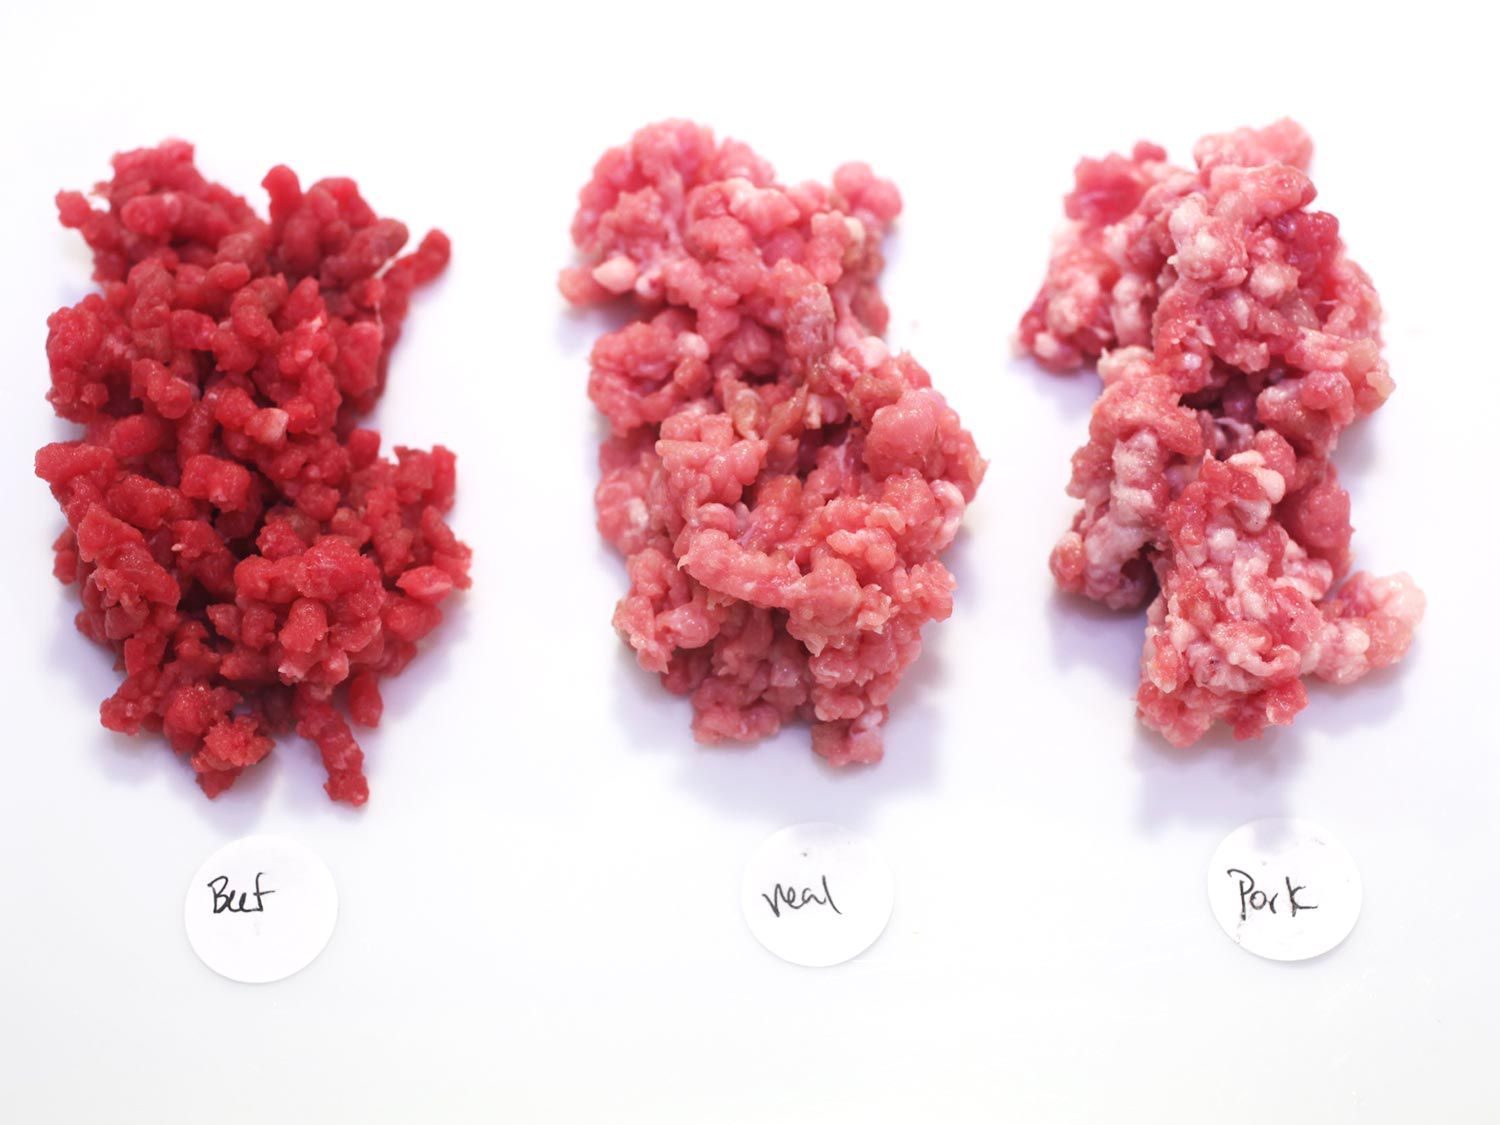 comparing raw ground beef, veal and pork